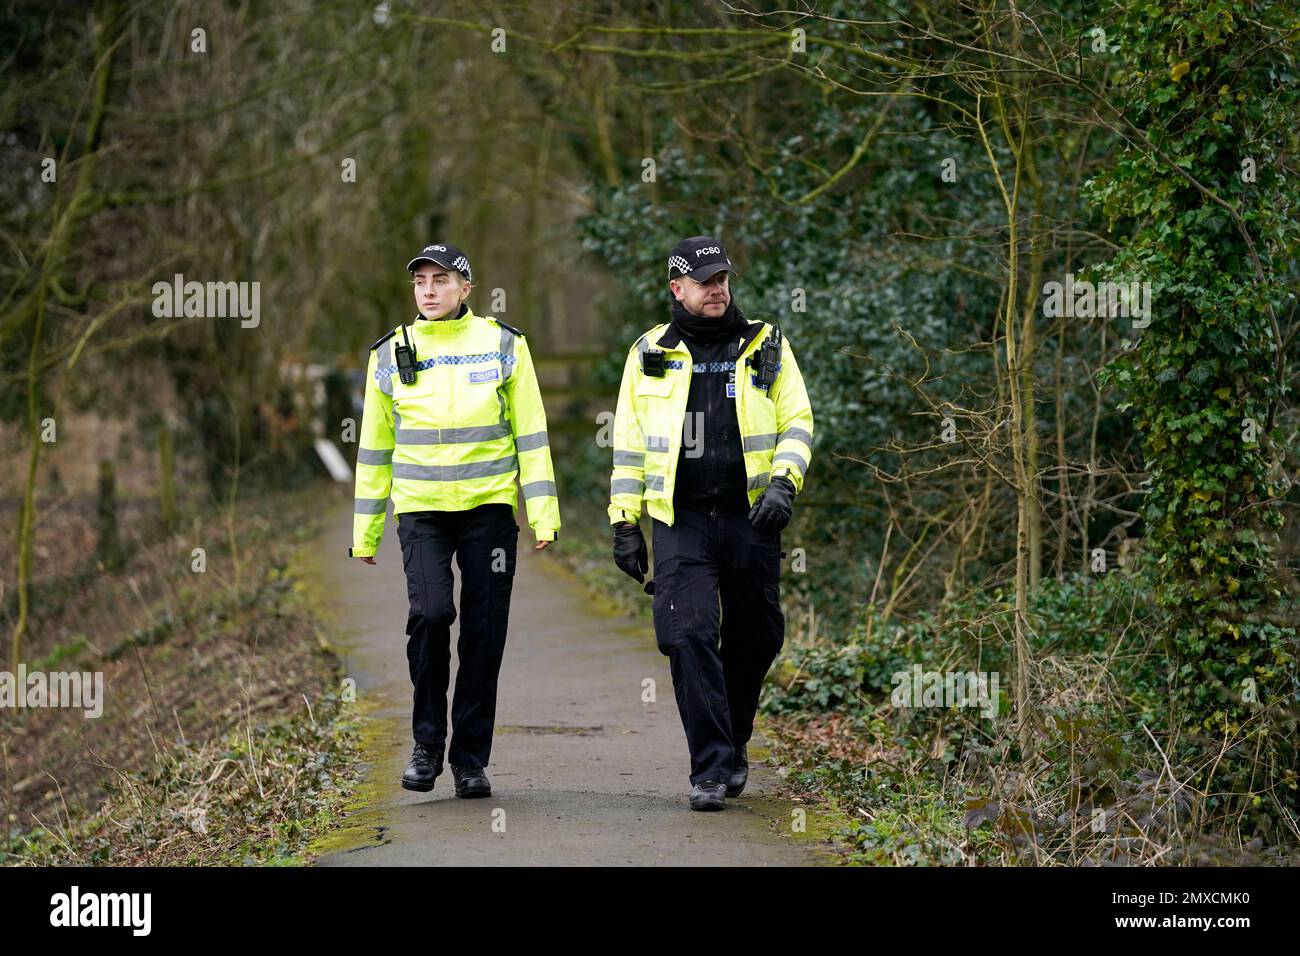 Police officers in St Michael's on Wyre, Lancashire, as police continue their search for missing woman Nicola Bulley, 45, who was last seen on the morning of Friday January 27, when she was spotted walking her dog on a footpath by the nearby River Wyre. Picture date: Friday February 3, 2023. Stock Photo